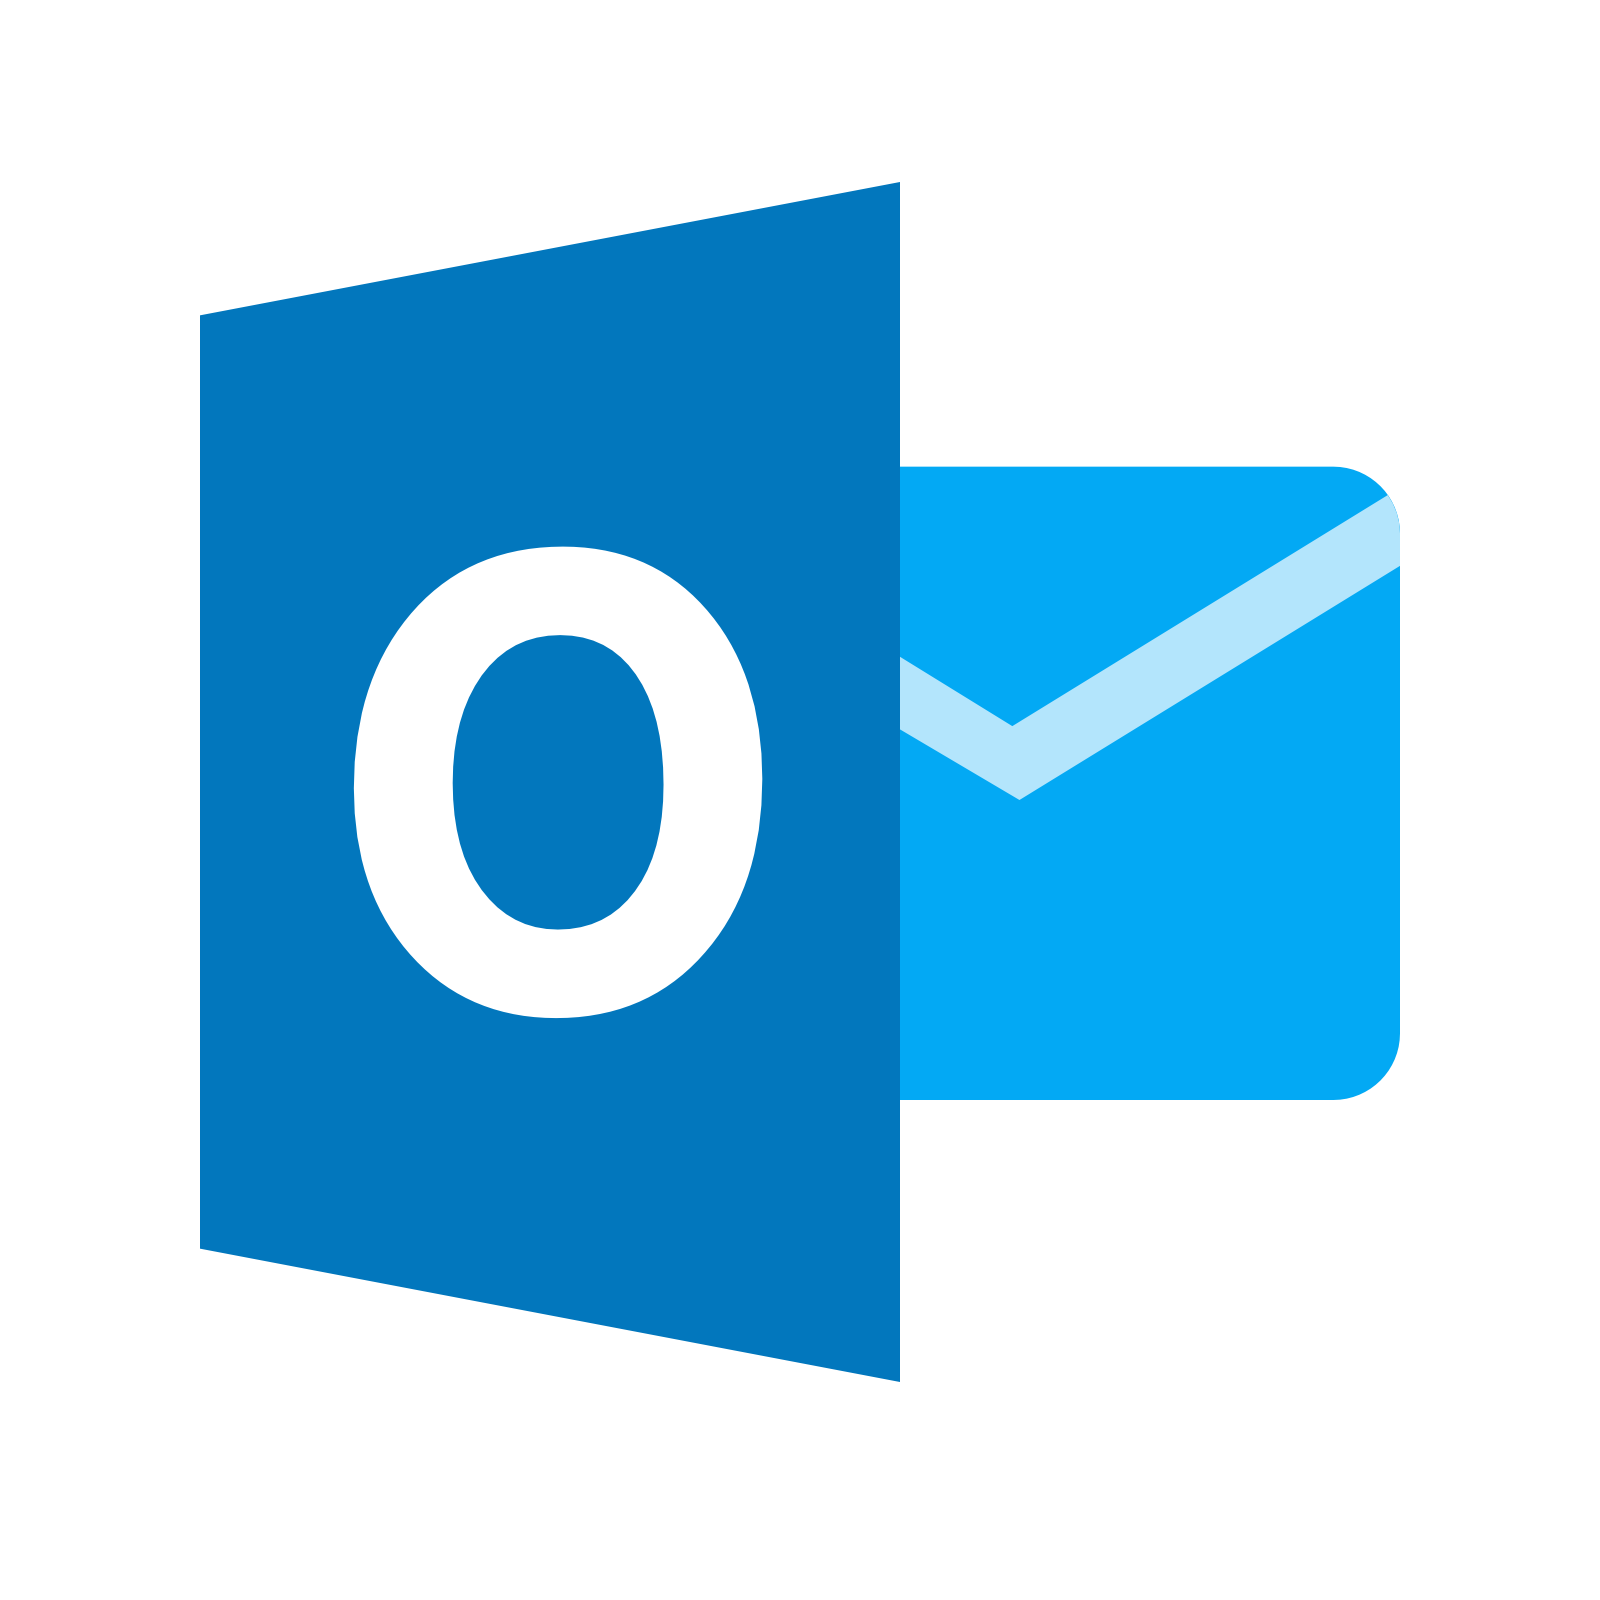 microsoft office outlook 2013 free download